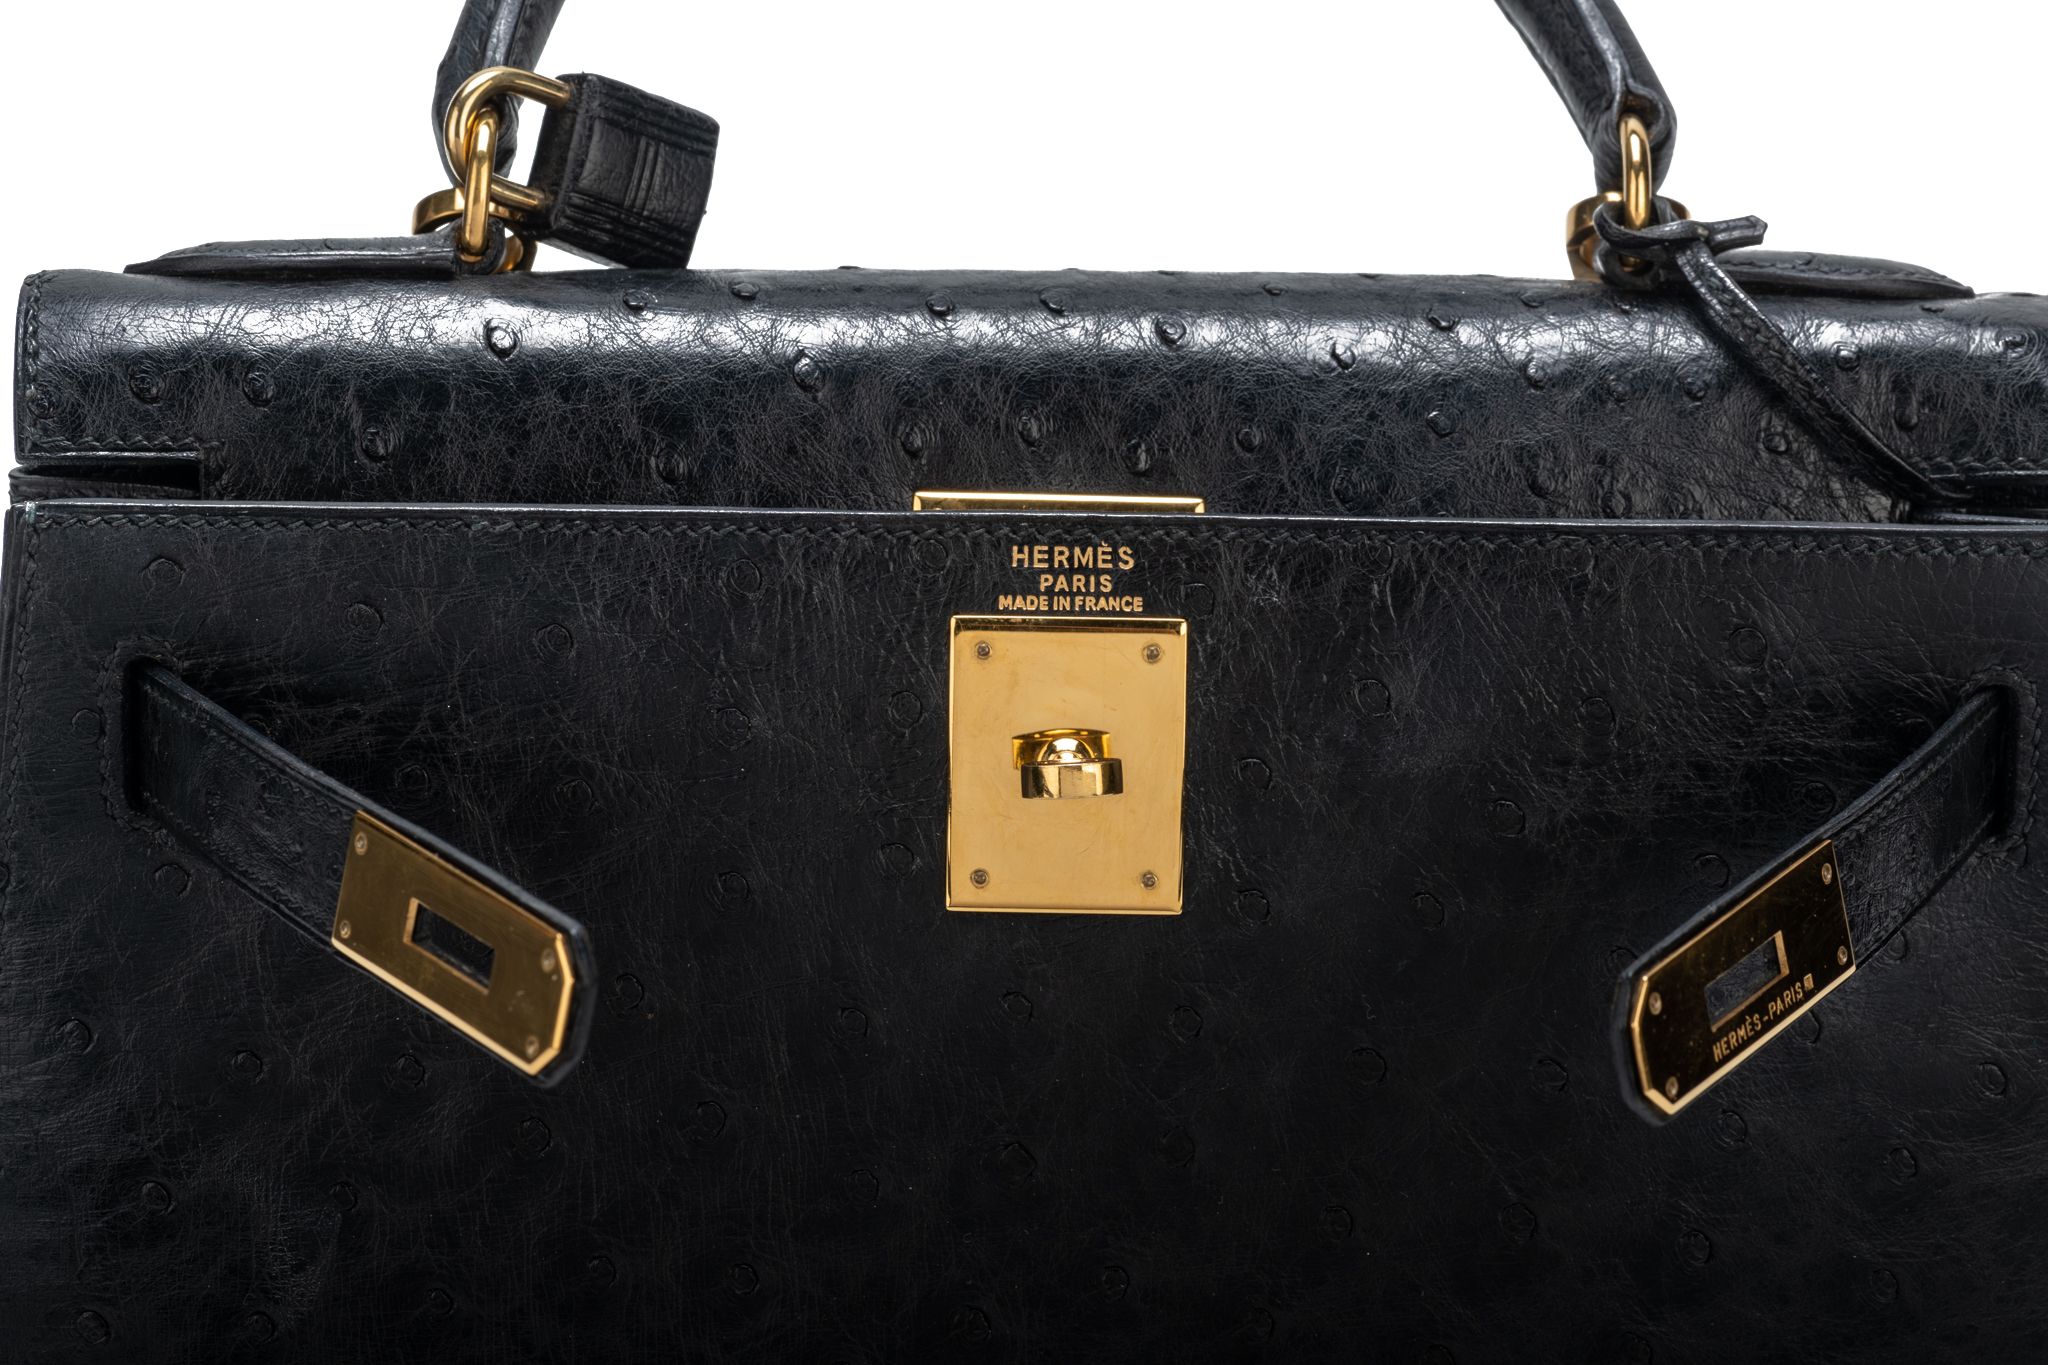 Kelly 35 Gold Colour in Ostrich Leather with gold Hardware. Hermès